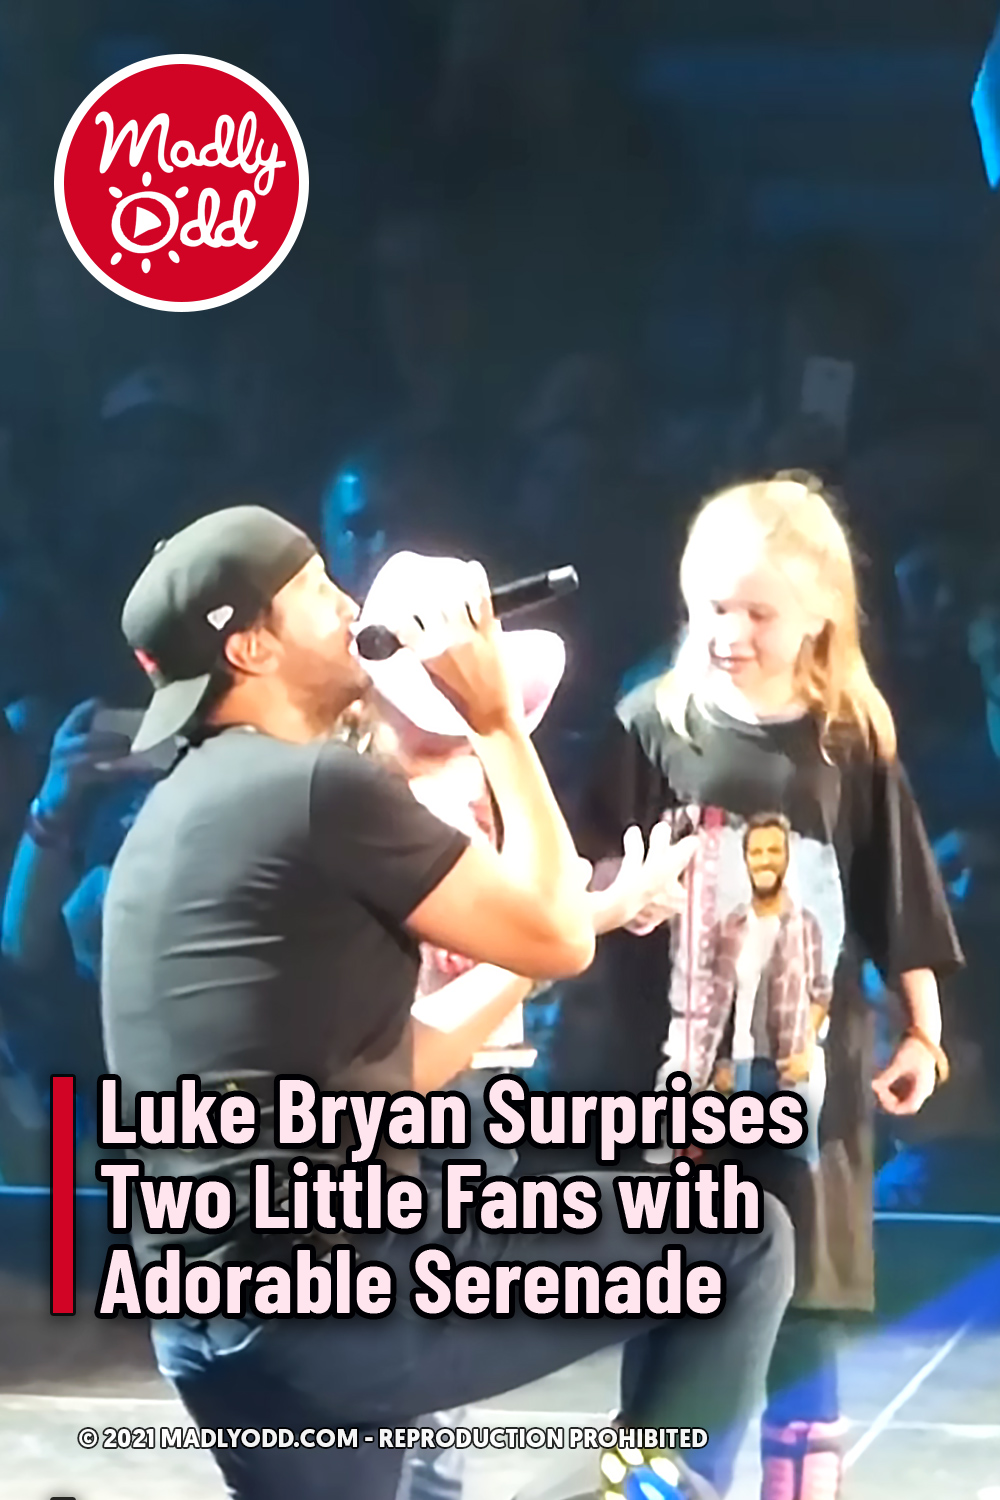 Luke Bryan Surprises Two Little Fans with Adorable Serenade